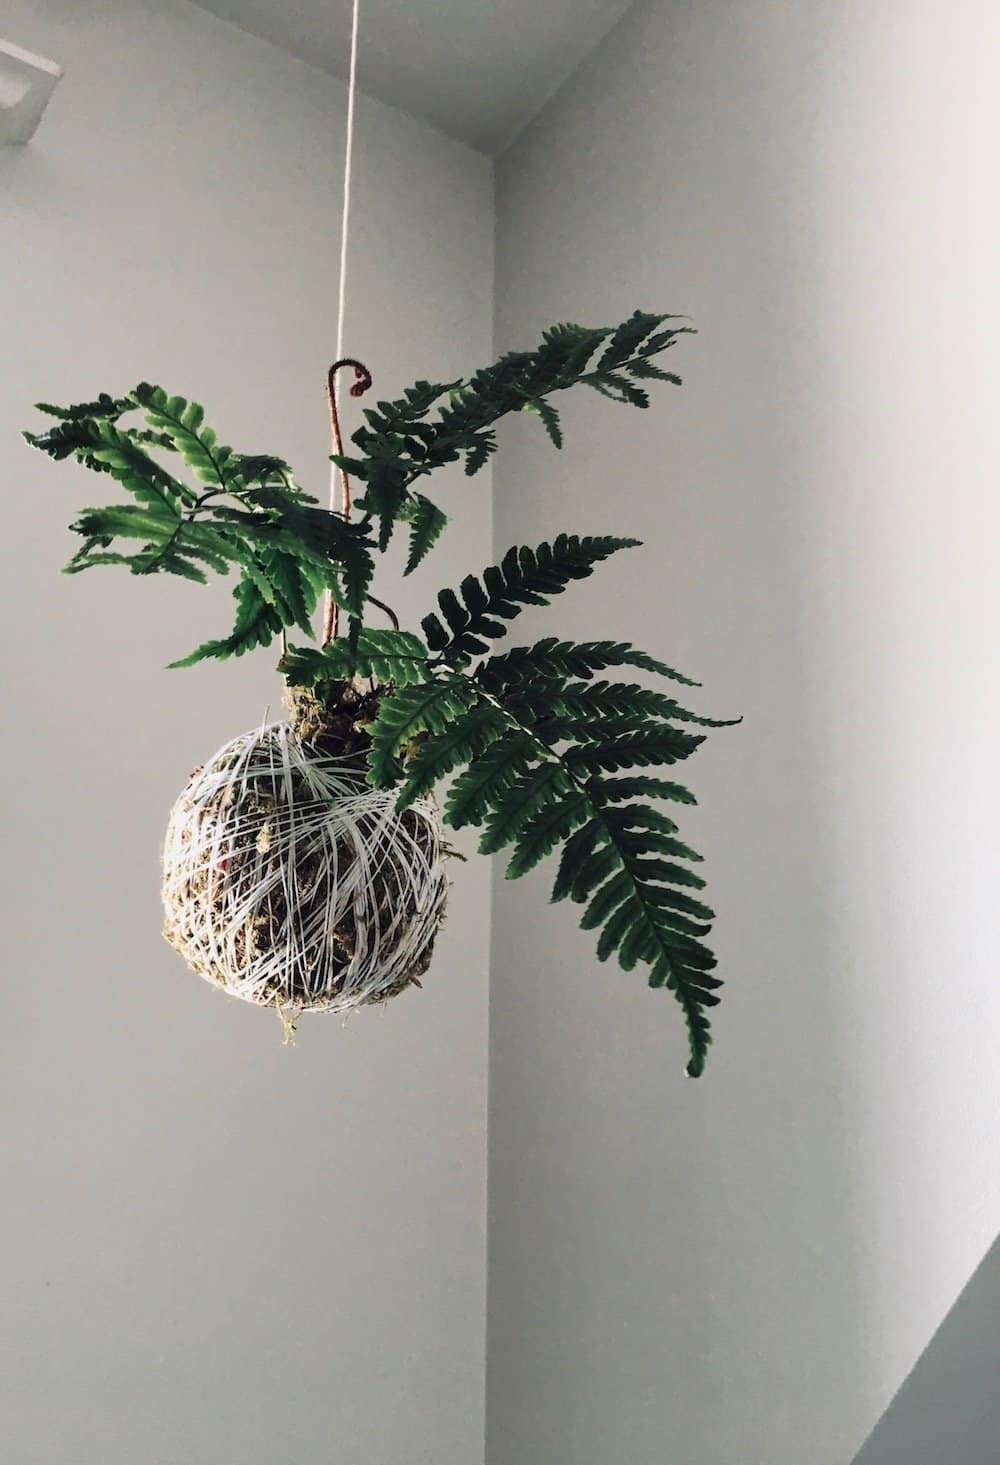 I gasped when i saw the end result! This kokedama moss ball string garden is an easy way to bring greenery into your home year-round. Check out this kokedama tutorial for the diy details #kokedama #mossball #stringgarden #moss